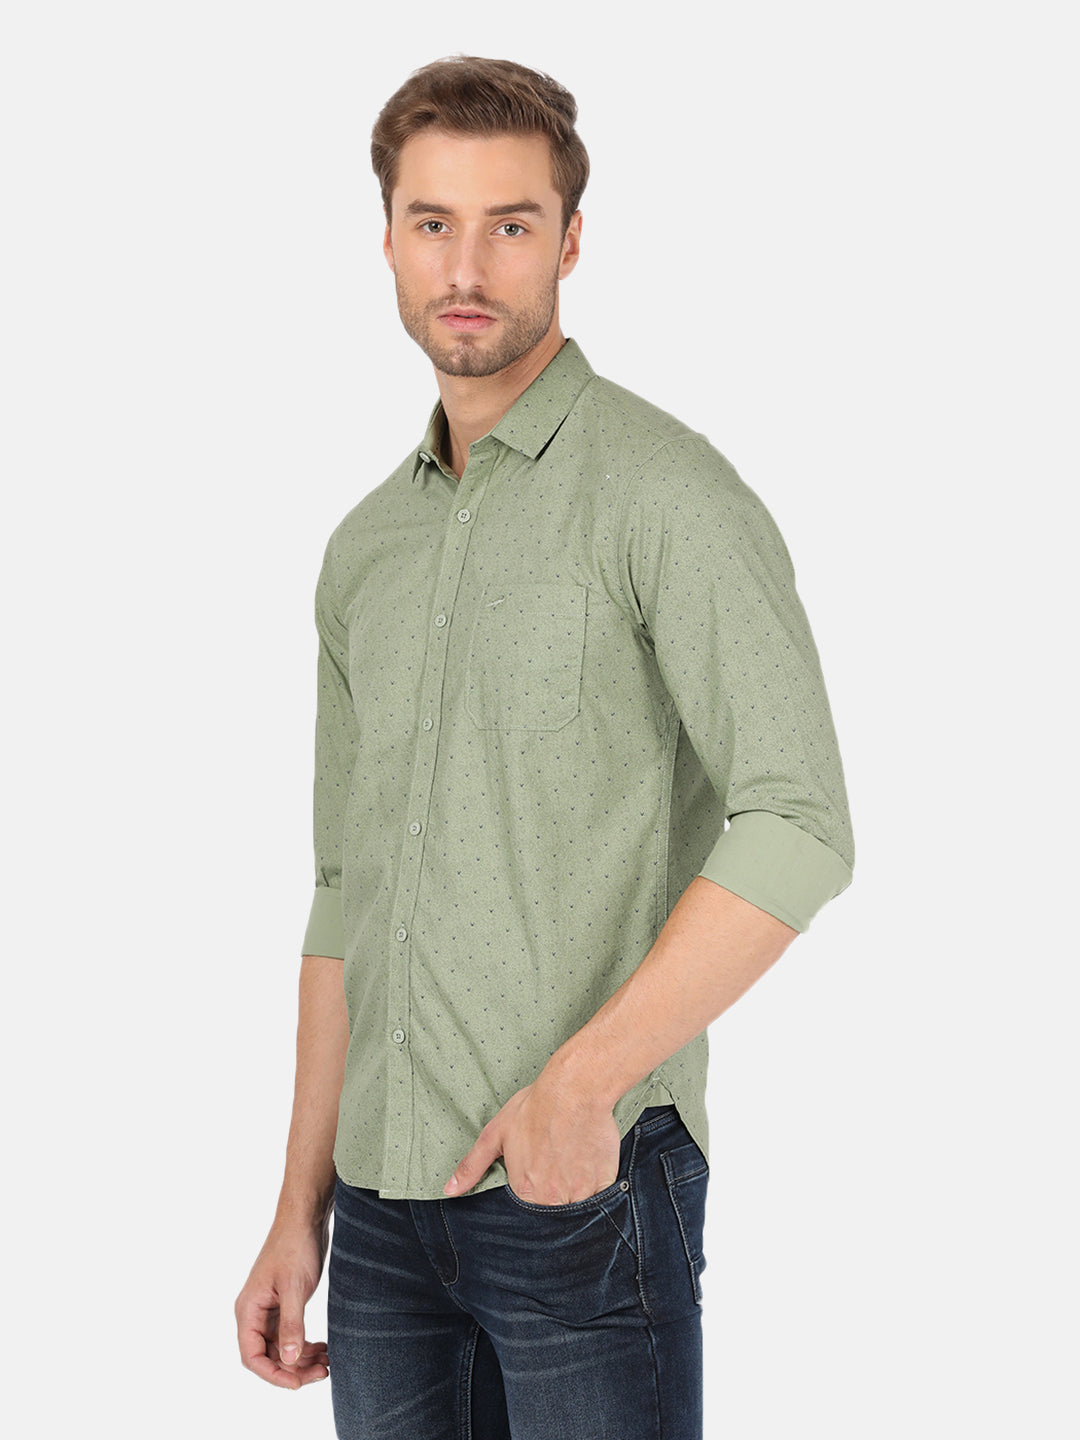 Crocodile Casual Full Sleeve Slim Fit Printed Light Olive with Collar Shirt for Men